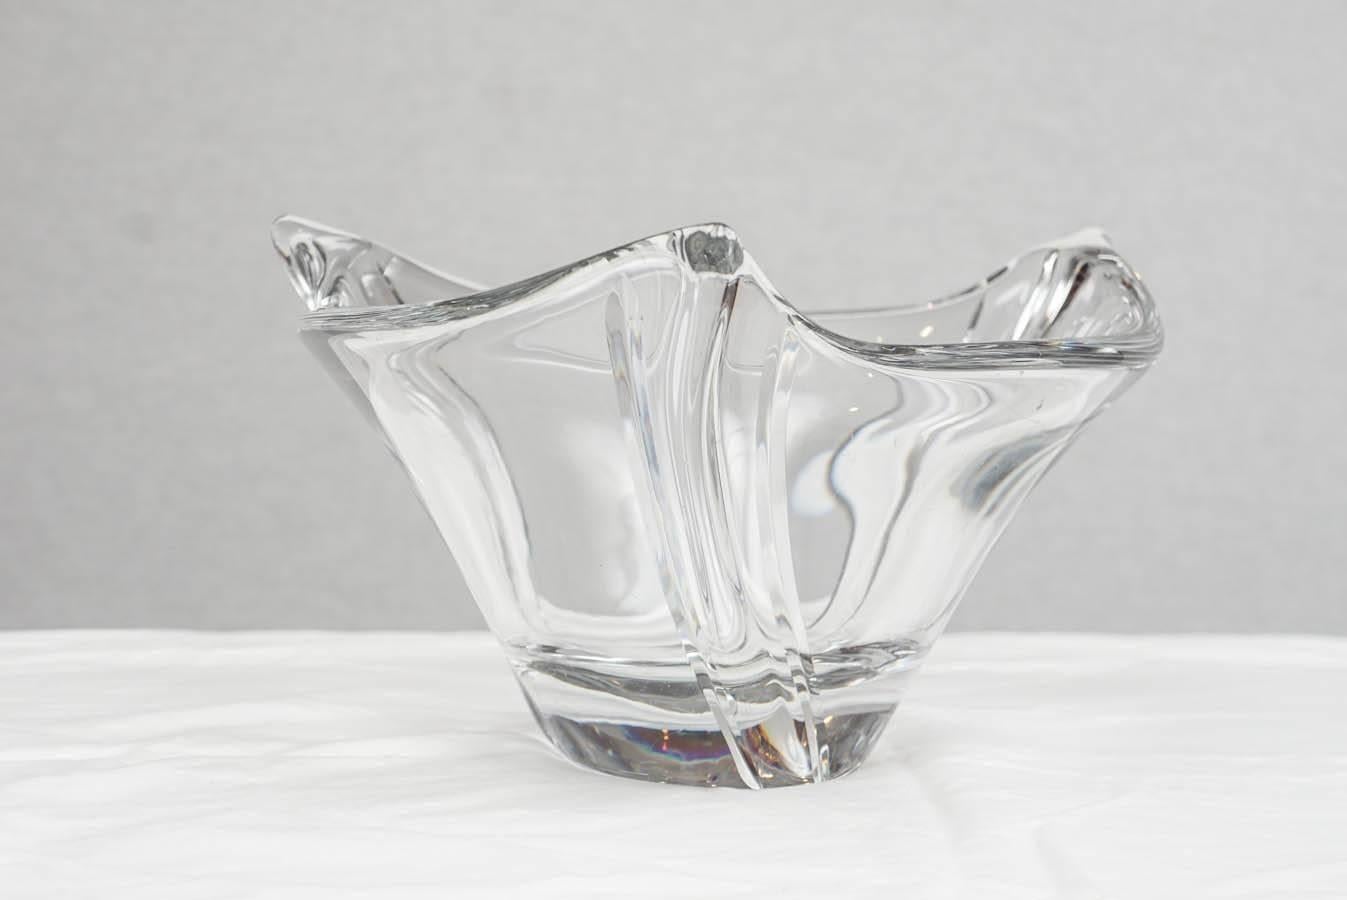 French lead crystal bowl in an elegant form that works in both modern and traditional settings. The heavy glass is very sculptural and is signed on the base with the etched Daum mark. Working as well on an entry hall console as it does on a holiday